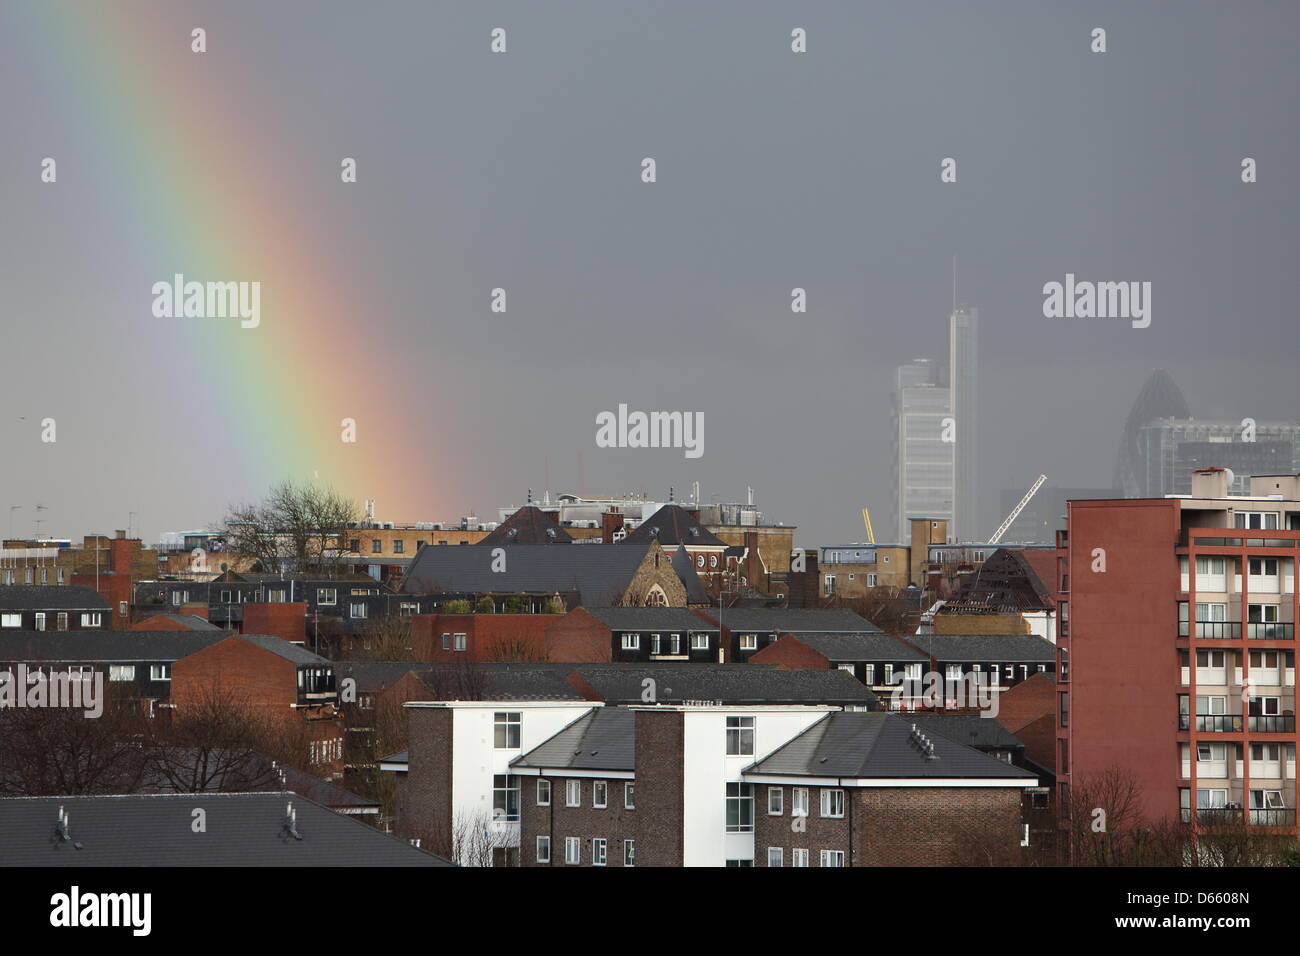 London, UK. Friday 12th April 2013. A rainbow appears during a heavy April shower near the City. Credit: Monica Wells/Alamy Live News Stock Photo